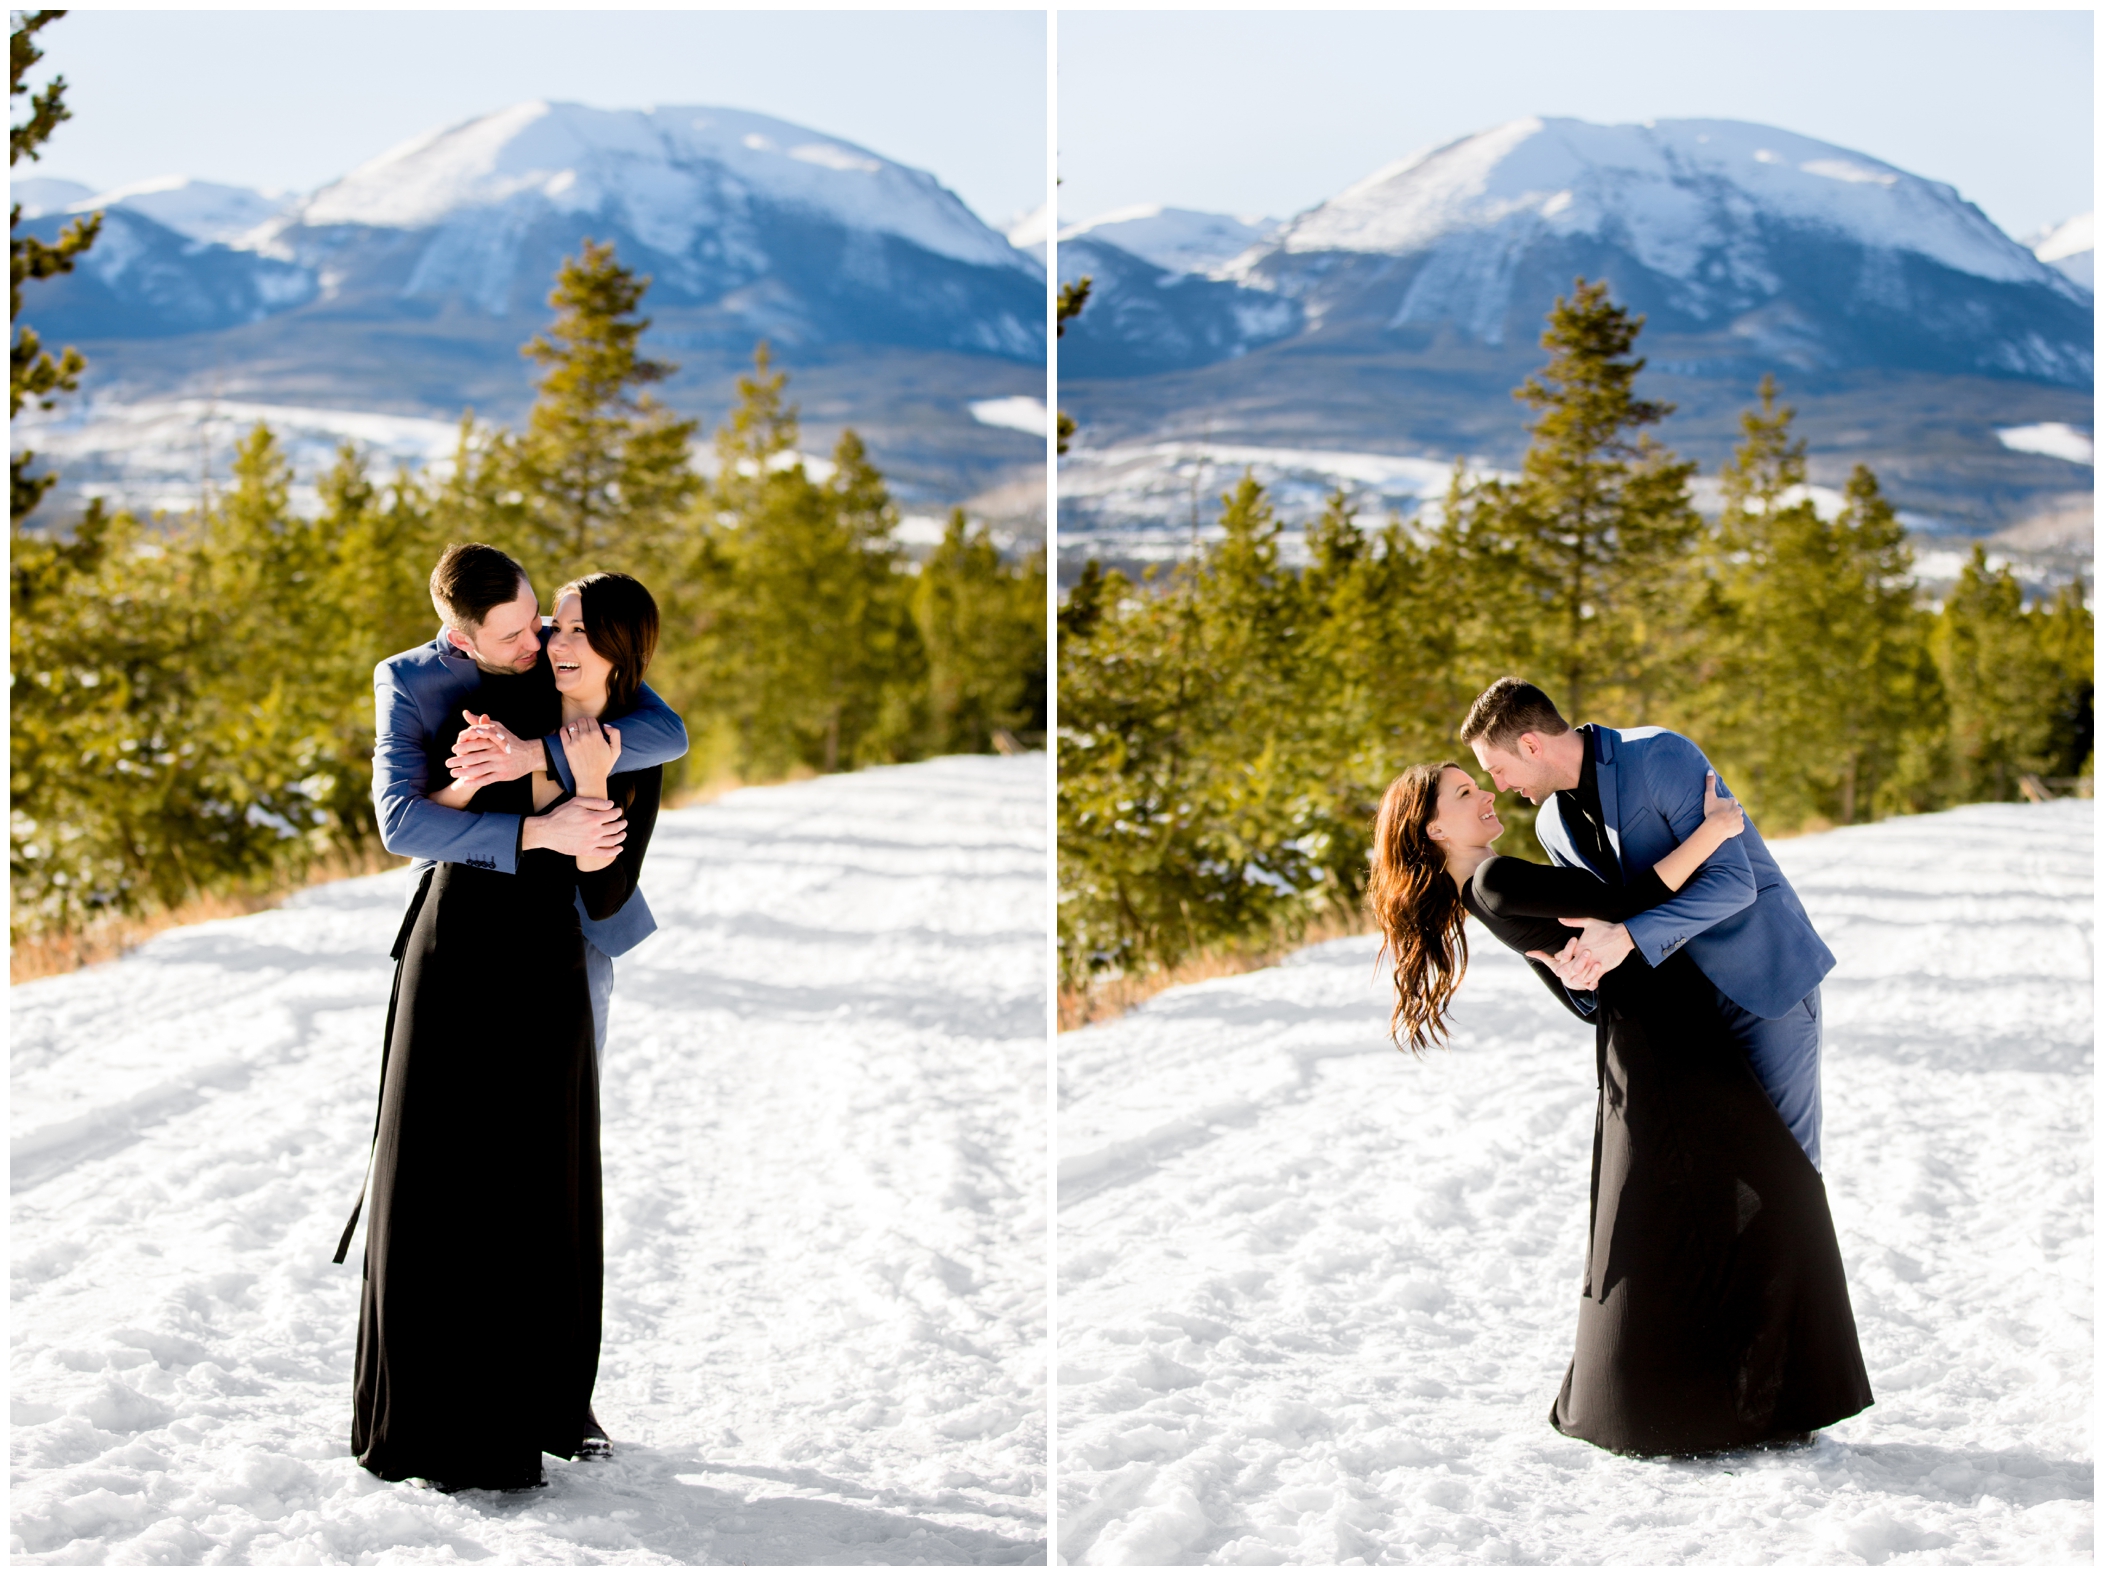 winter Breckenridge engagement photography in the snowy mountains 